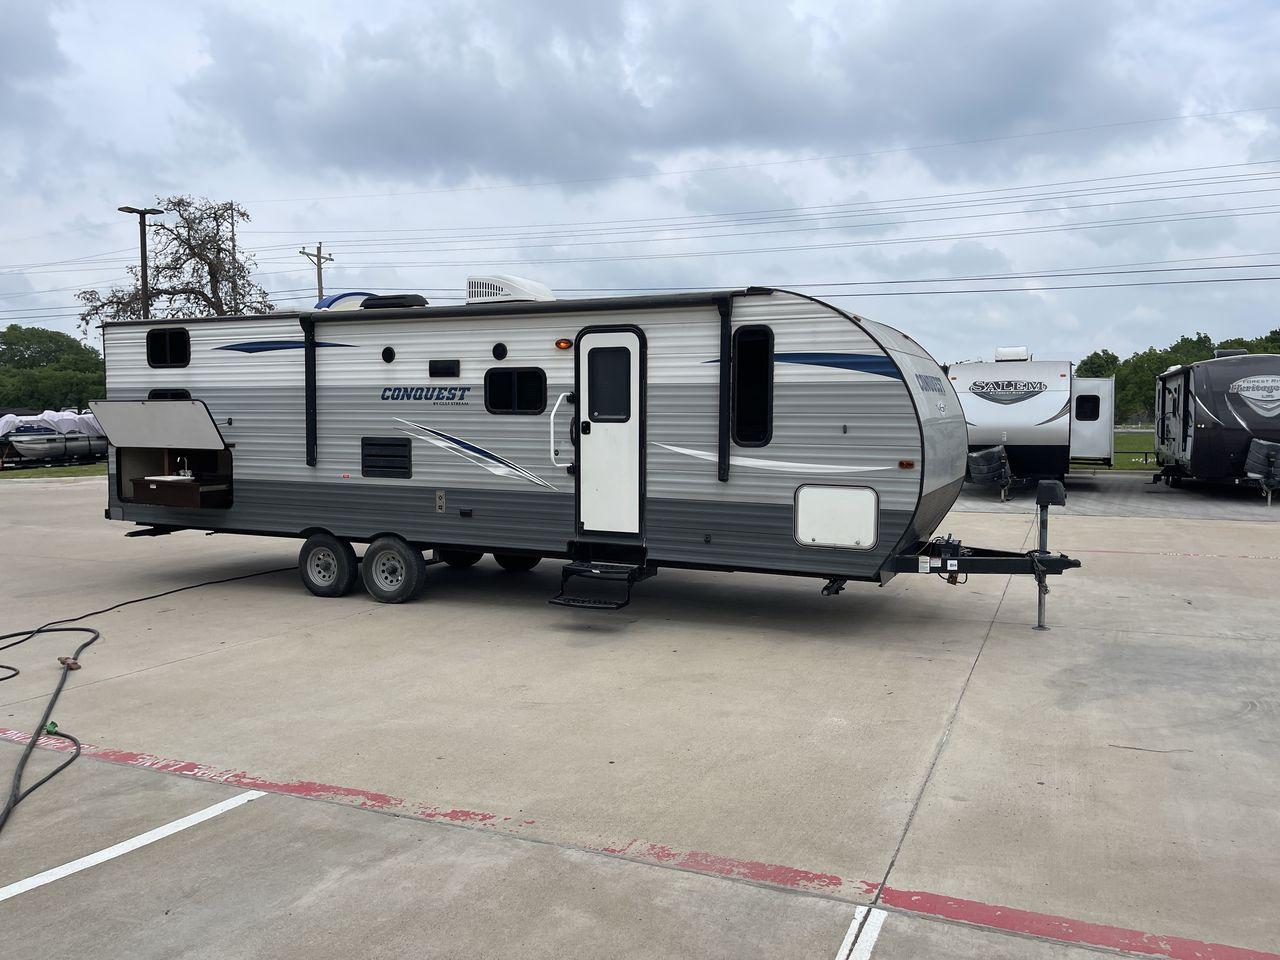 2019 GULF STREAM CONQUEST 274QB (1NL1G3226K1) , Length: 32.25 ft. | Dry Weight: 6,230 lbs. | Slides: 1 transmission, located at 4319 N Main St, Cleburne, TX, 76033, (817) 678-5133, 32.385960, -97.391212 - The 2019 Gulf Stream 274QB is a dual-axle steel-wheel set-up that measures 32.25 ft. in length. It has a dry weight of 6,230 lbs. and a payload capacity of 1,918 lbs. It has automatic heating and cooling rated at 16,000 and 13,500 BTUs, respectively. It is also equipped with one power slide and a po - Photo #24